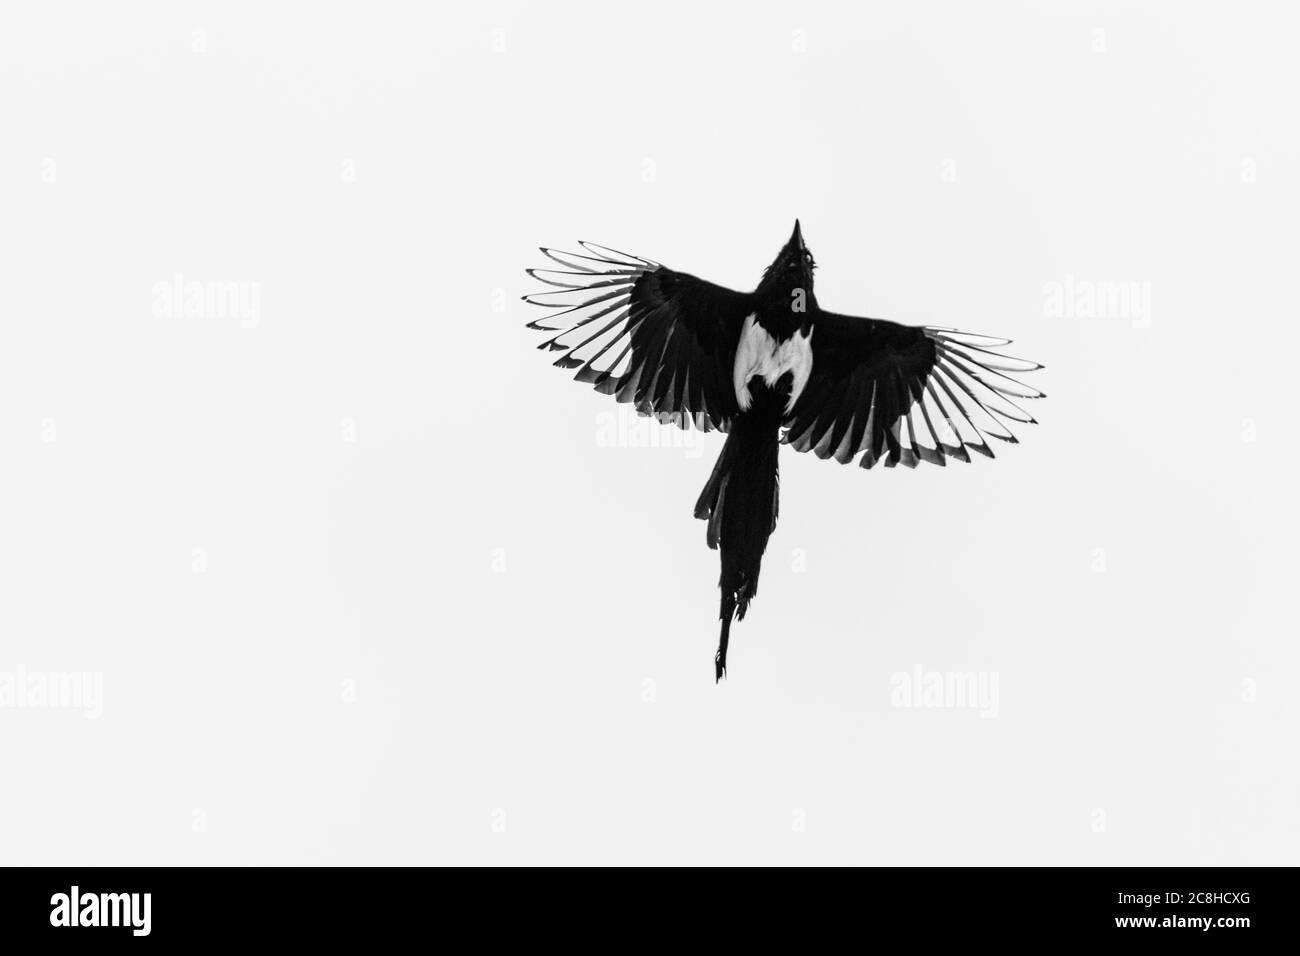 Flying Magpie (Pica pica) Stock Photo